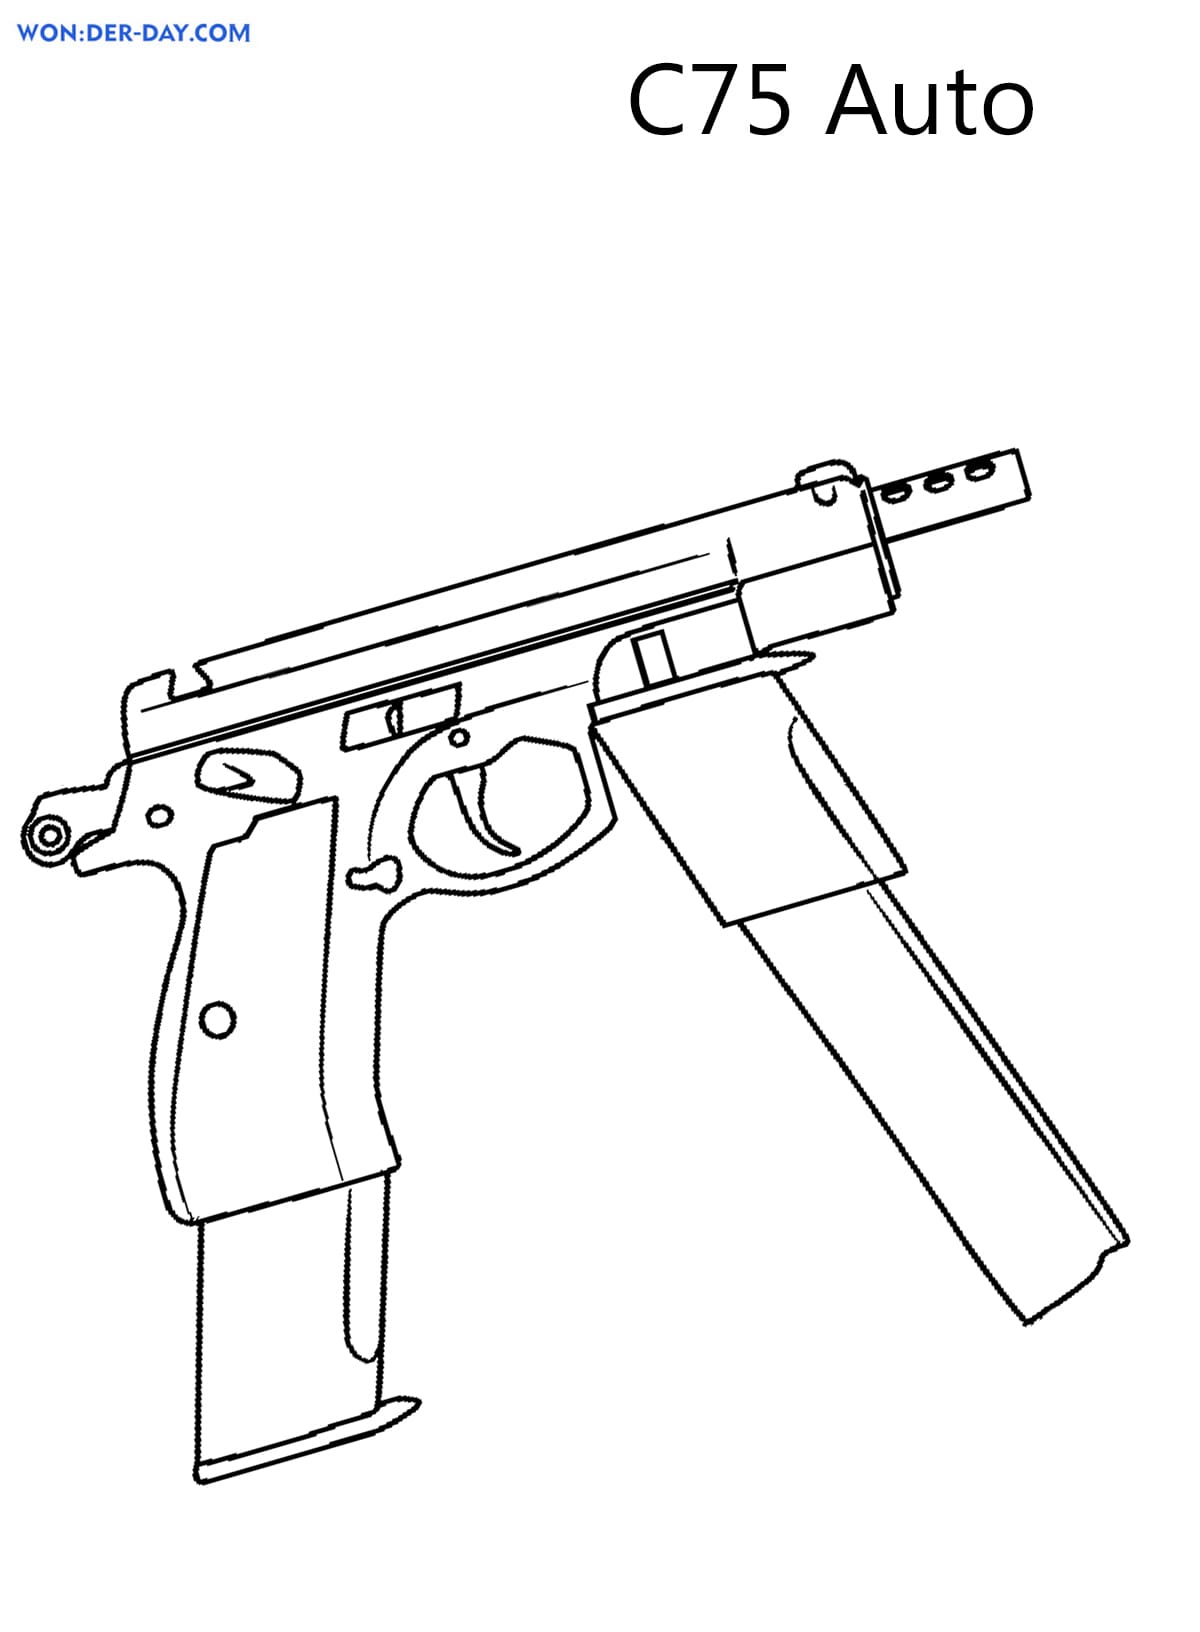 Download Weapon coloring pages . Print for boys | WONDER DAY